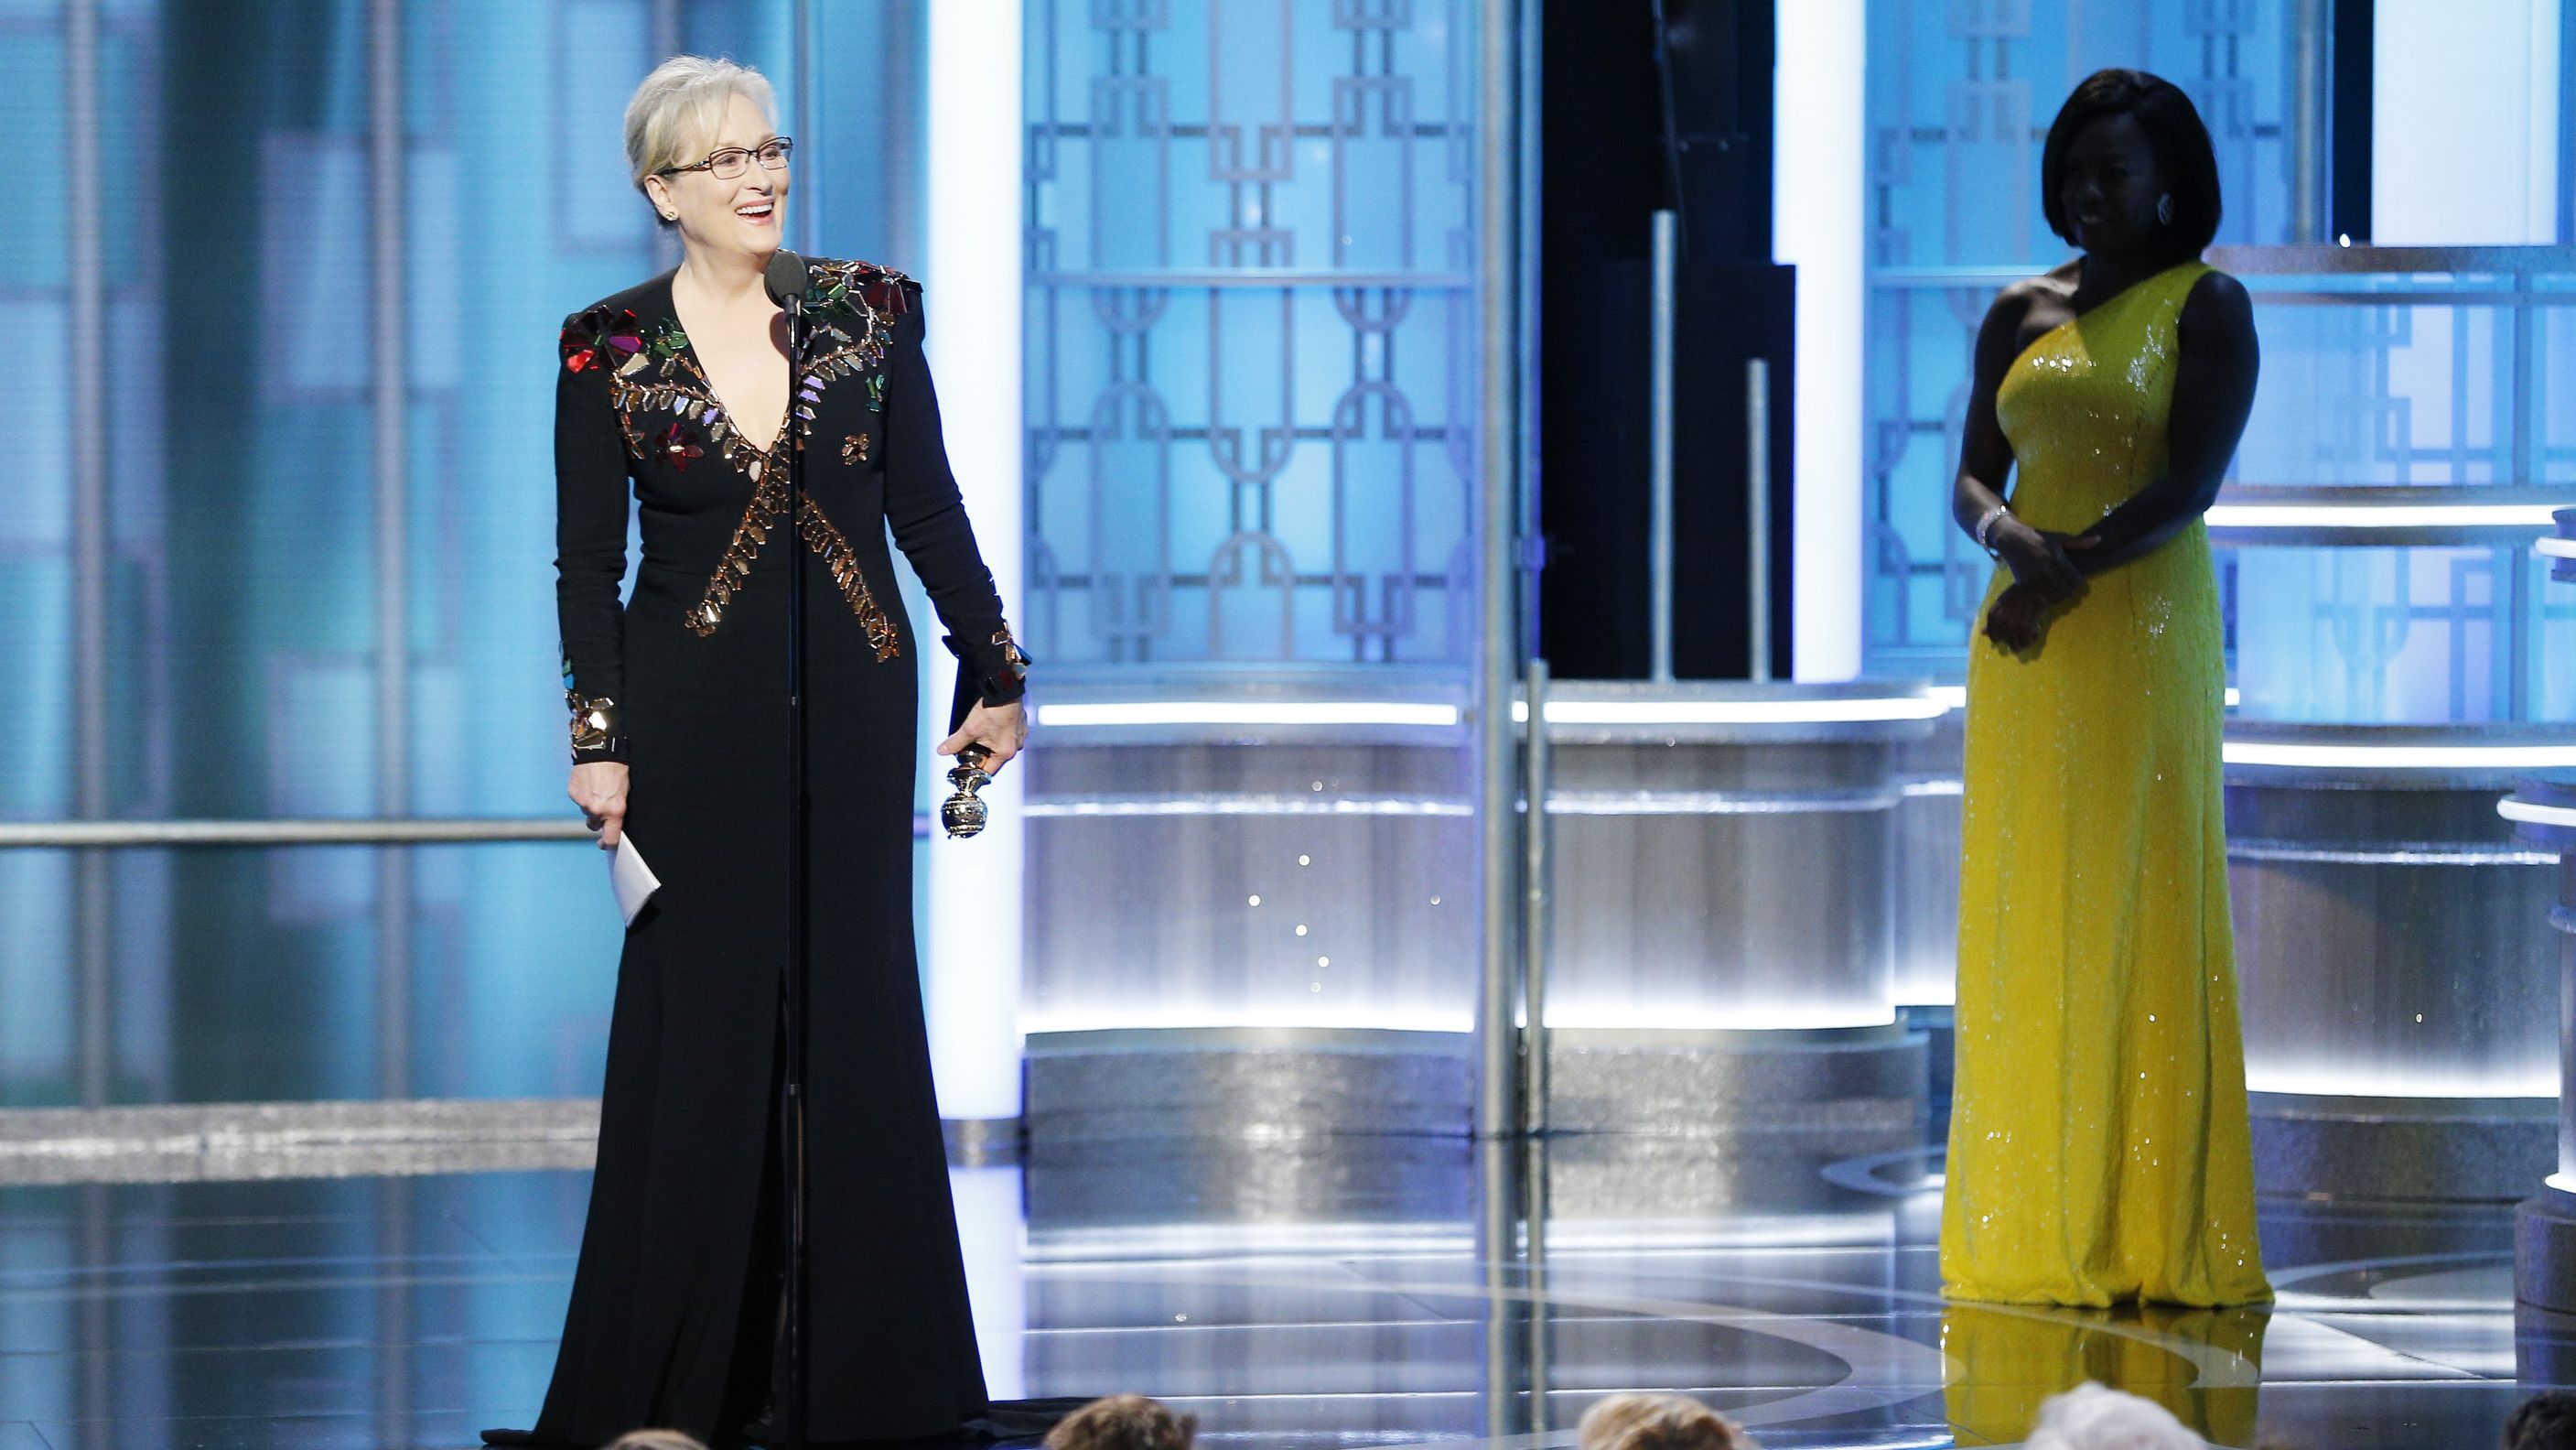 Meryl Streep accepts  Cecil B. DeMille Award  during the 74th Annual Golden Globe Awards.